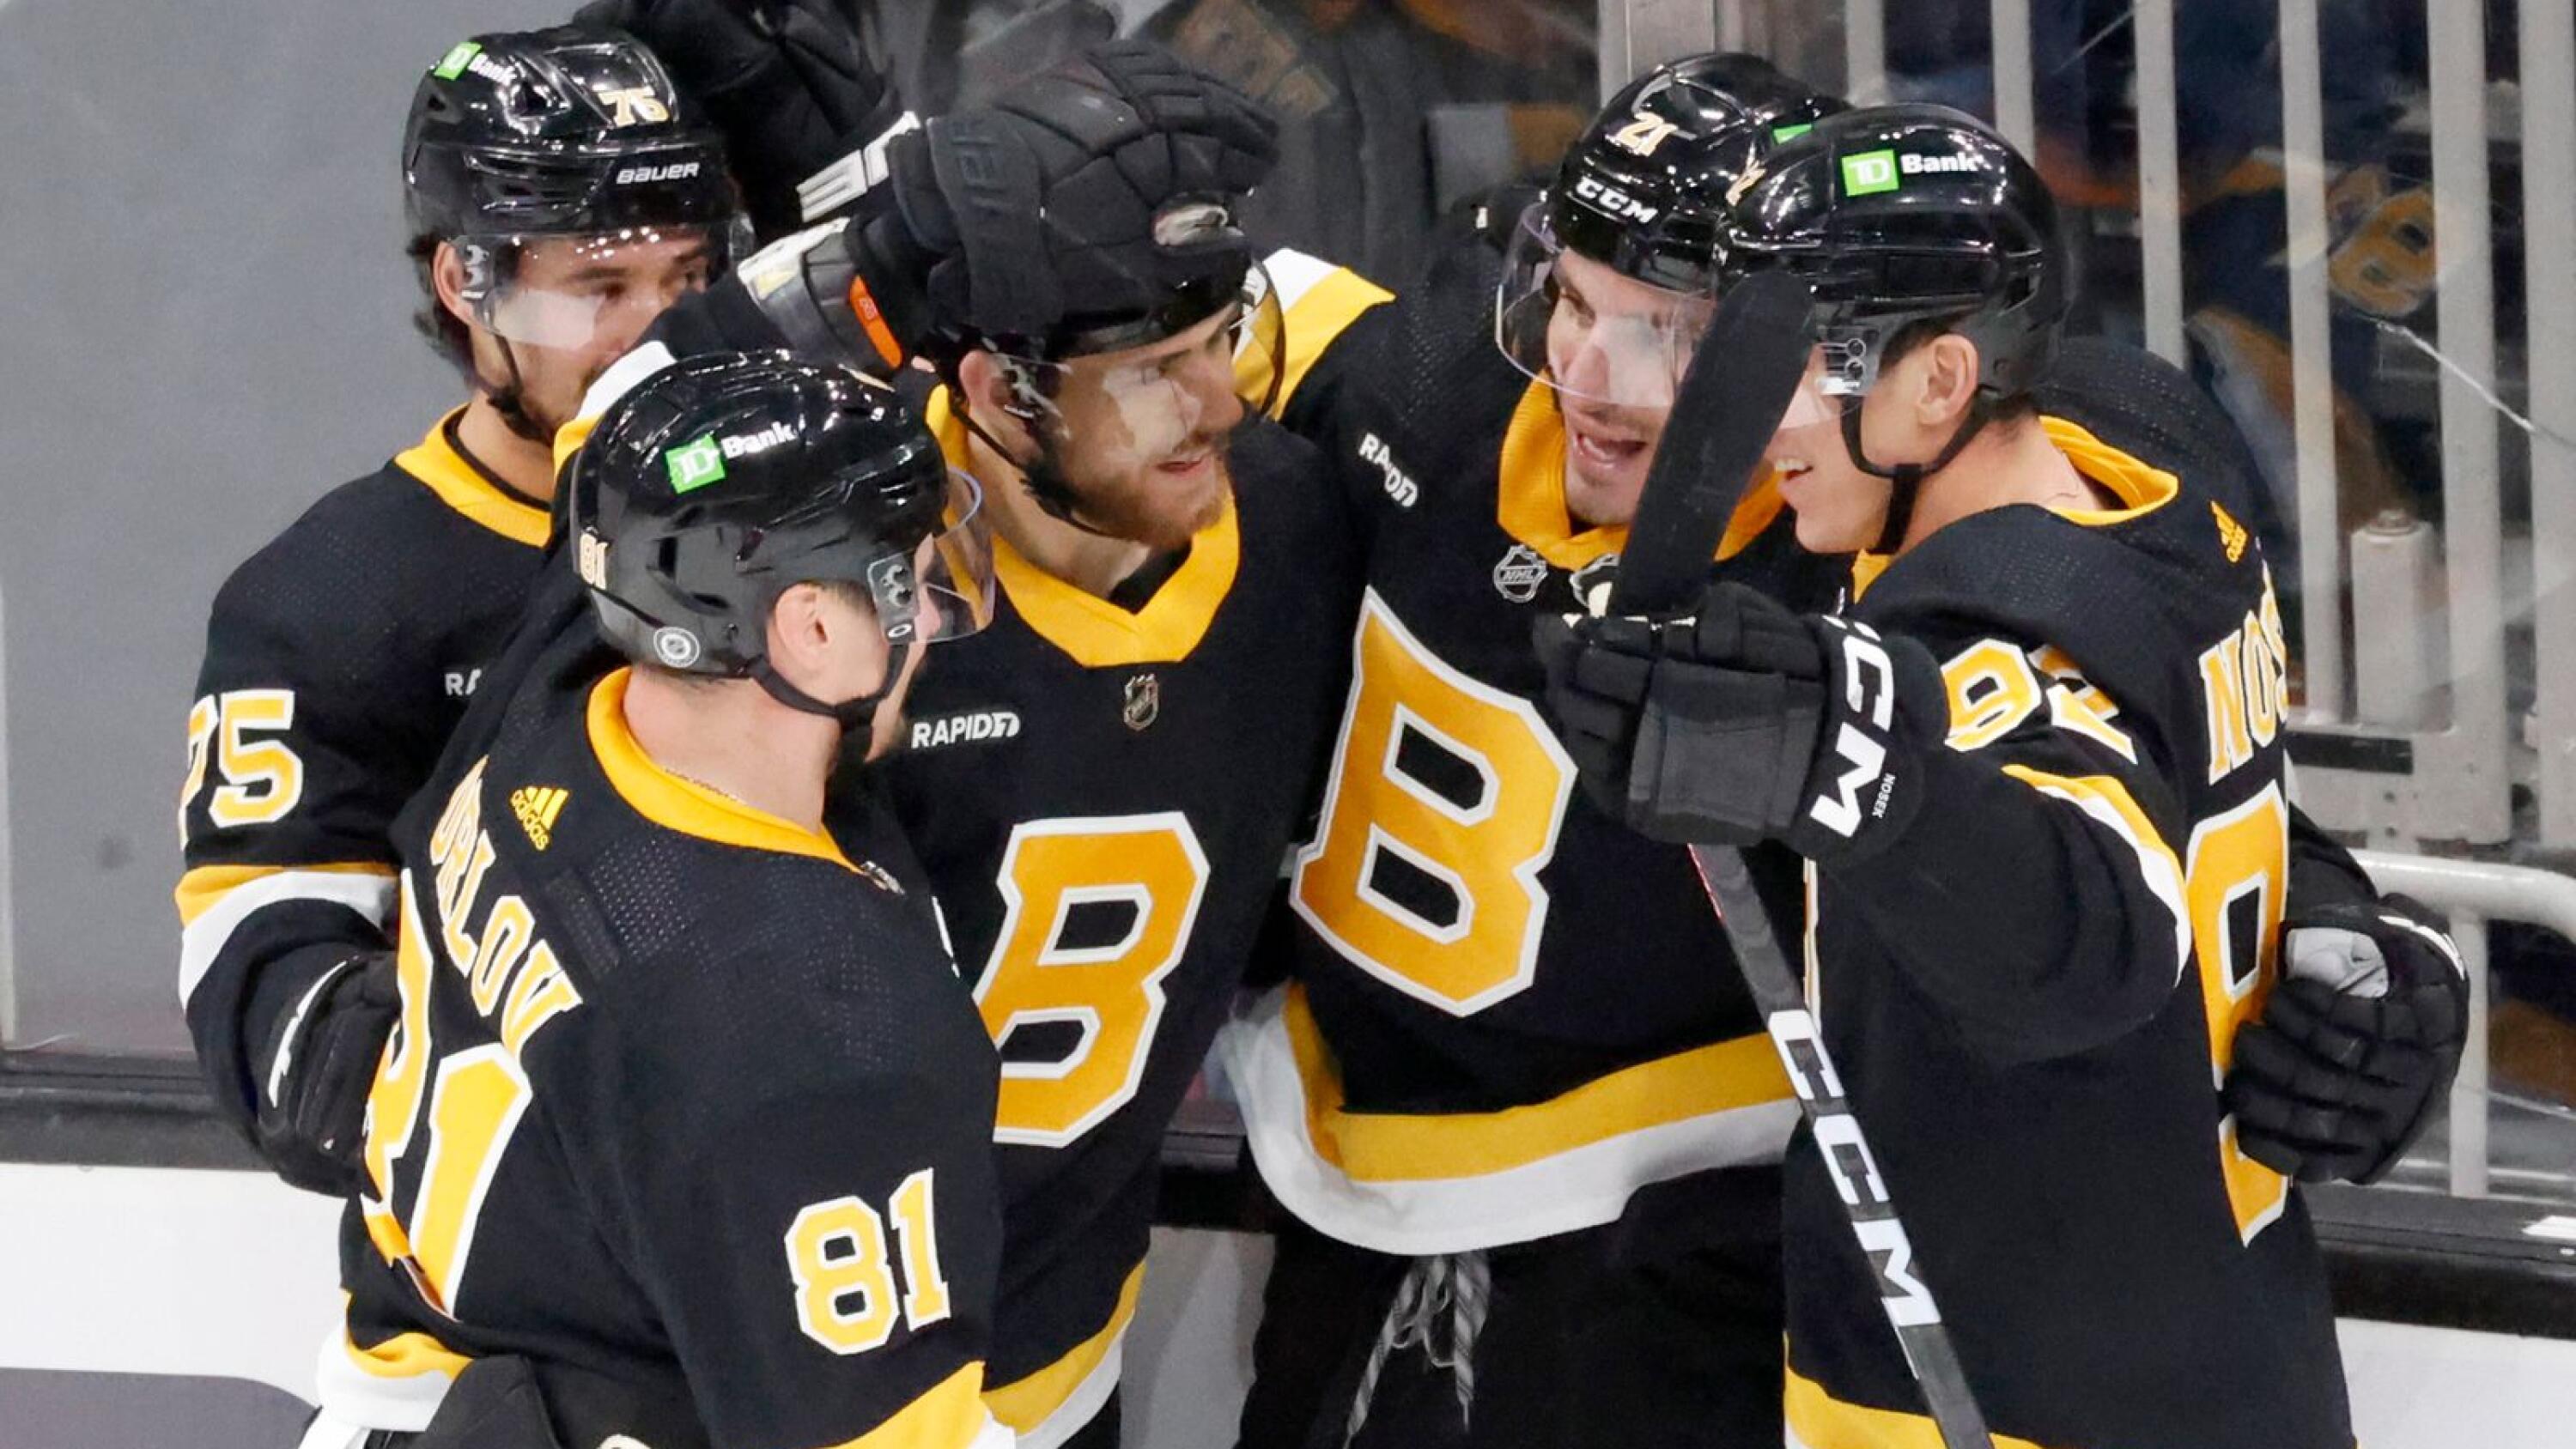 Bruins fastest to 50 wins in NHL history, Red Wings 3-2